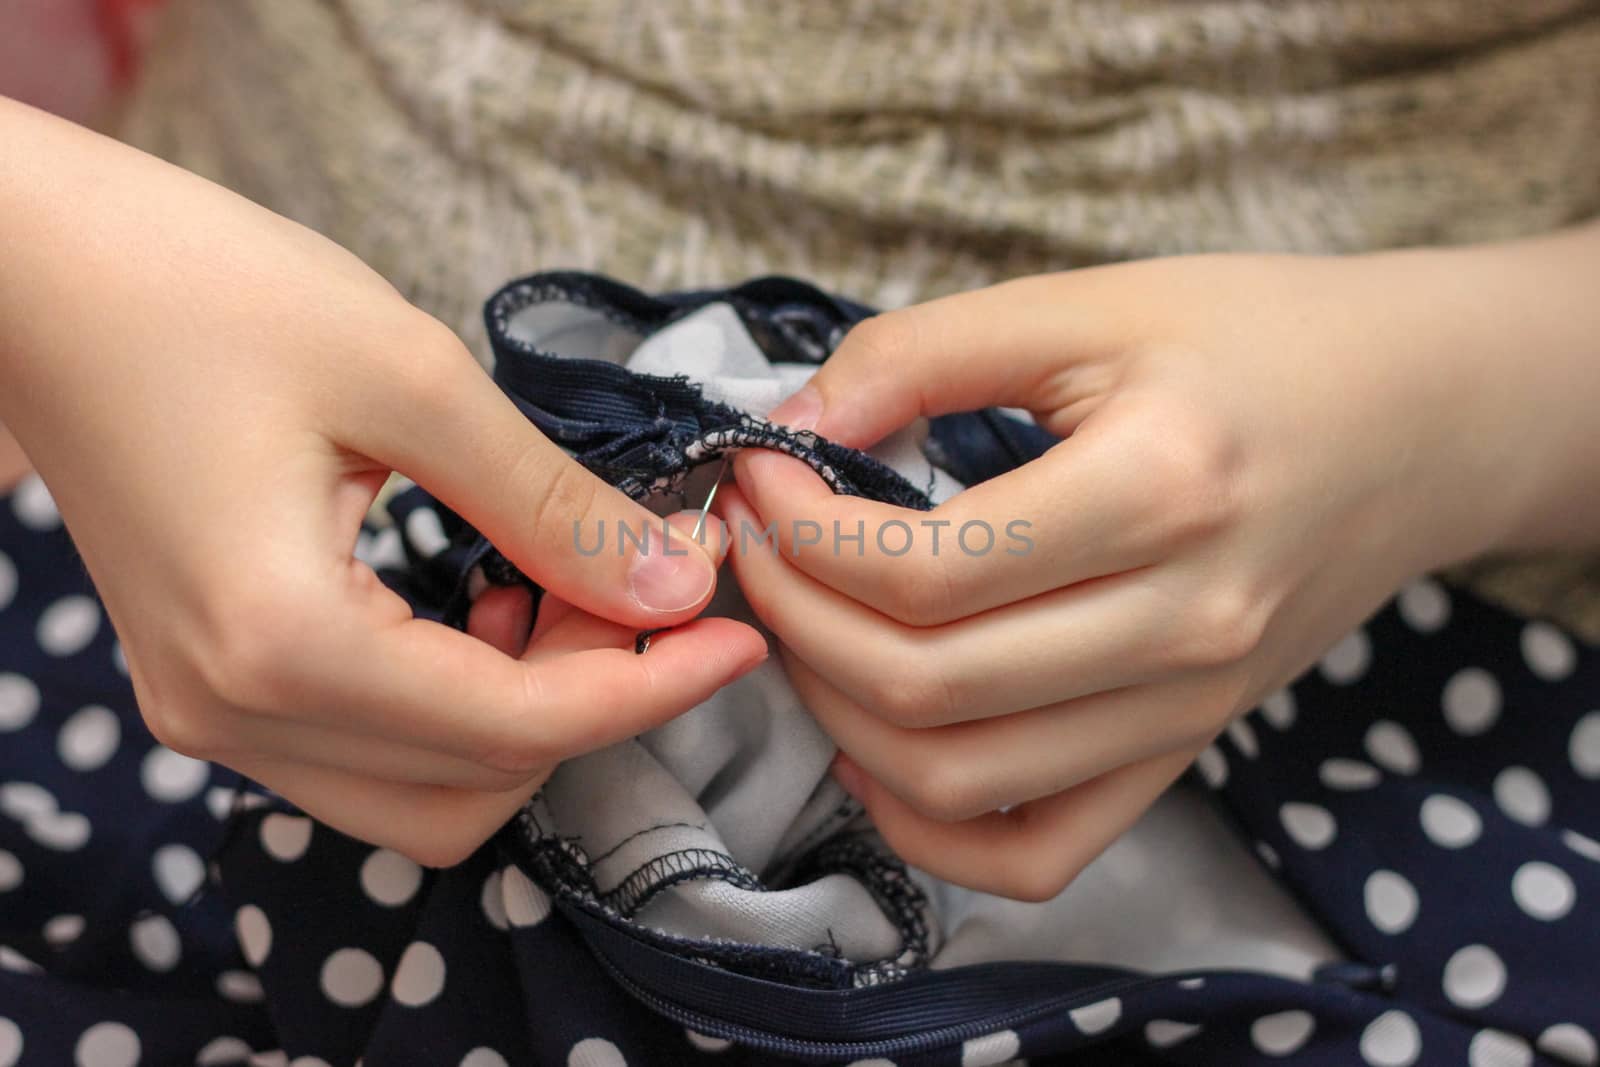 The girl sews with a needle. Needlework. Polka dot fabric by vas_evg